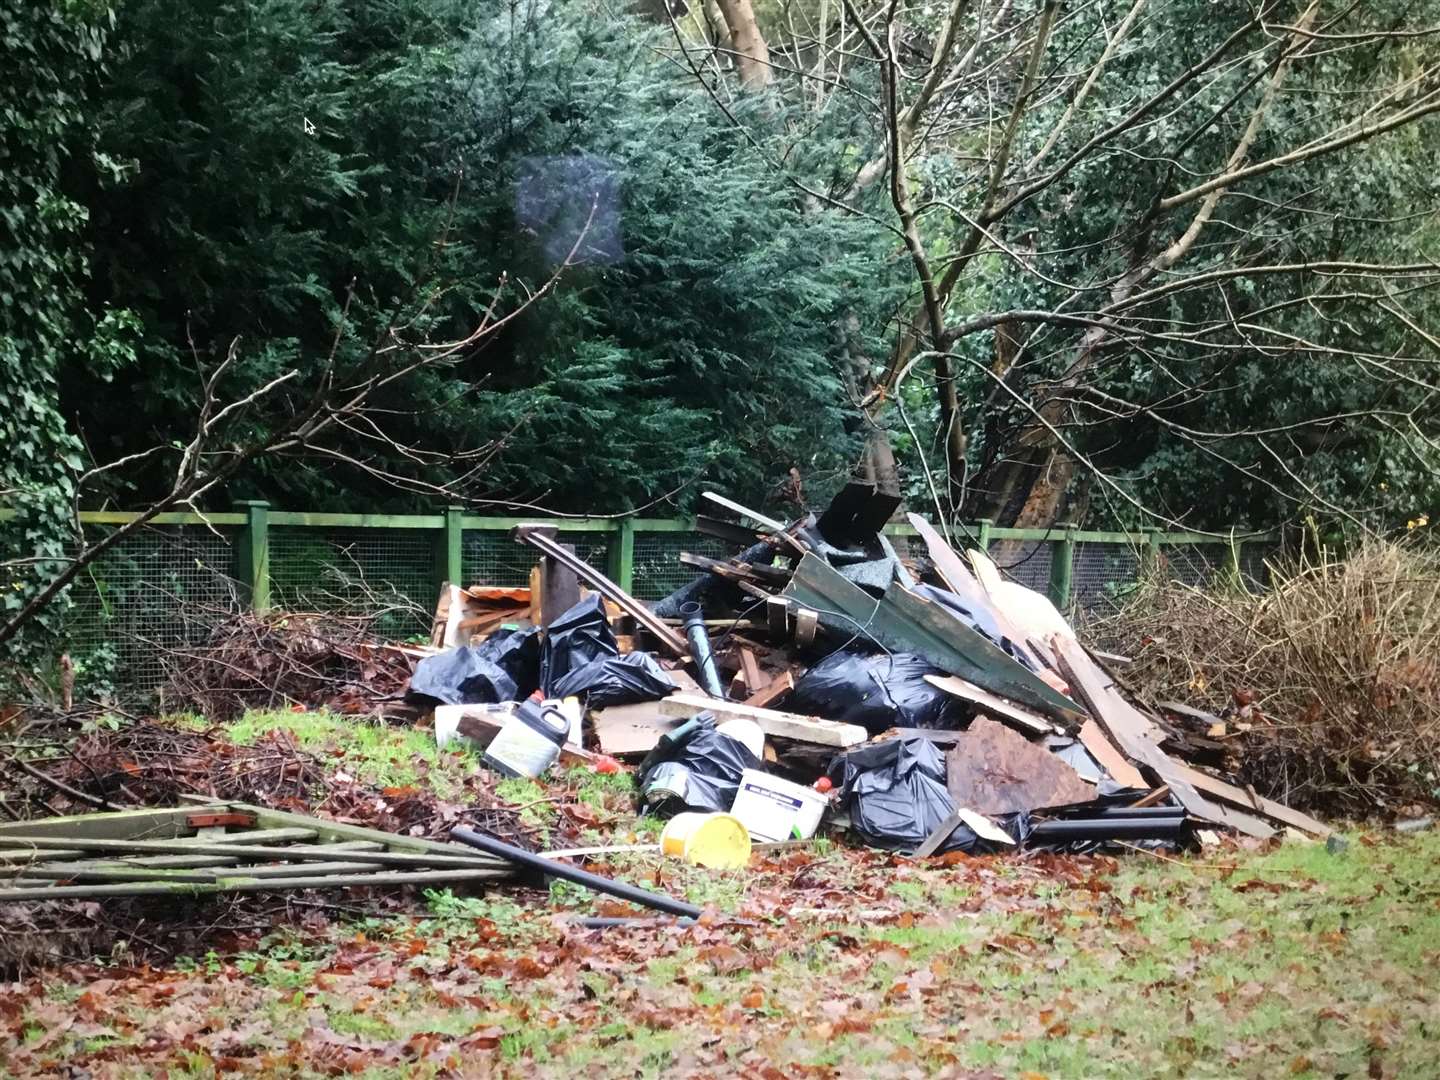 Piles of waste dumped at the site (5855146)